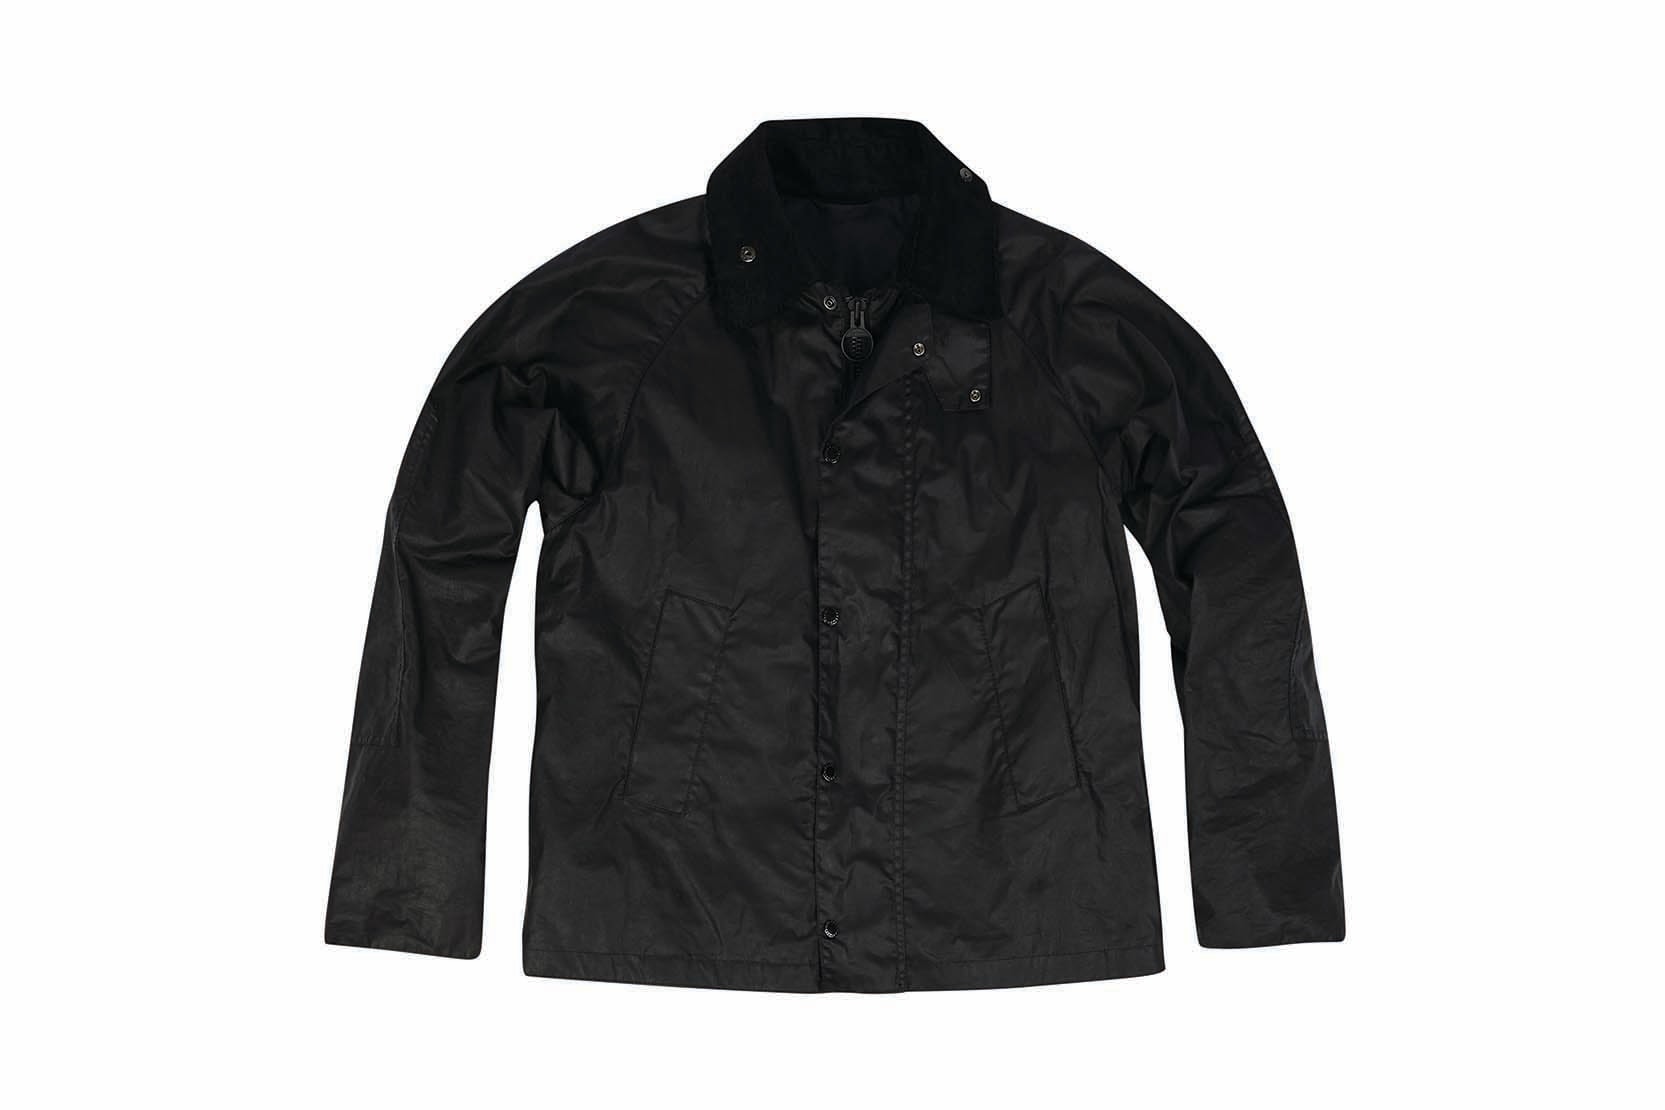 Barbour x Engineered Garments Fall/Winter 2018 Collection New York 5-Piece Capsule Collection Waxed Cotton Daiki Suzuki FW18 AW18 Japanese Designer American Sportswear Workwear Military Clothing Black Navy Olive Waxed Cotton Parkas Capes Bedales Blouson Carnaby St Soho London Available Purchase Cop Buy Soon